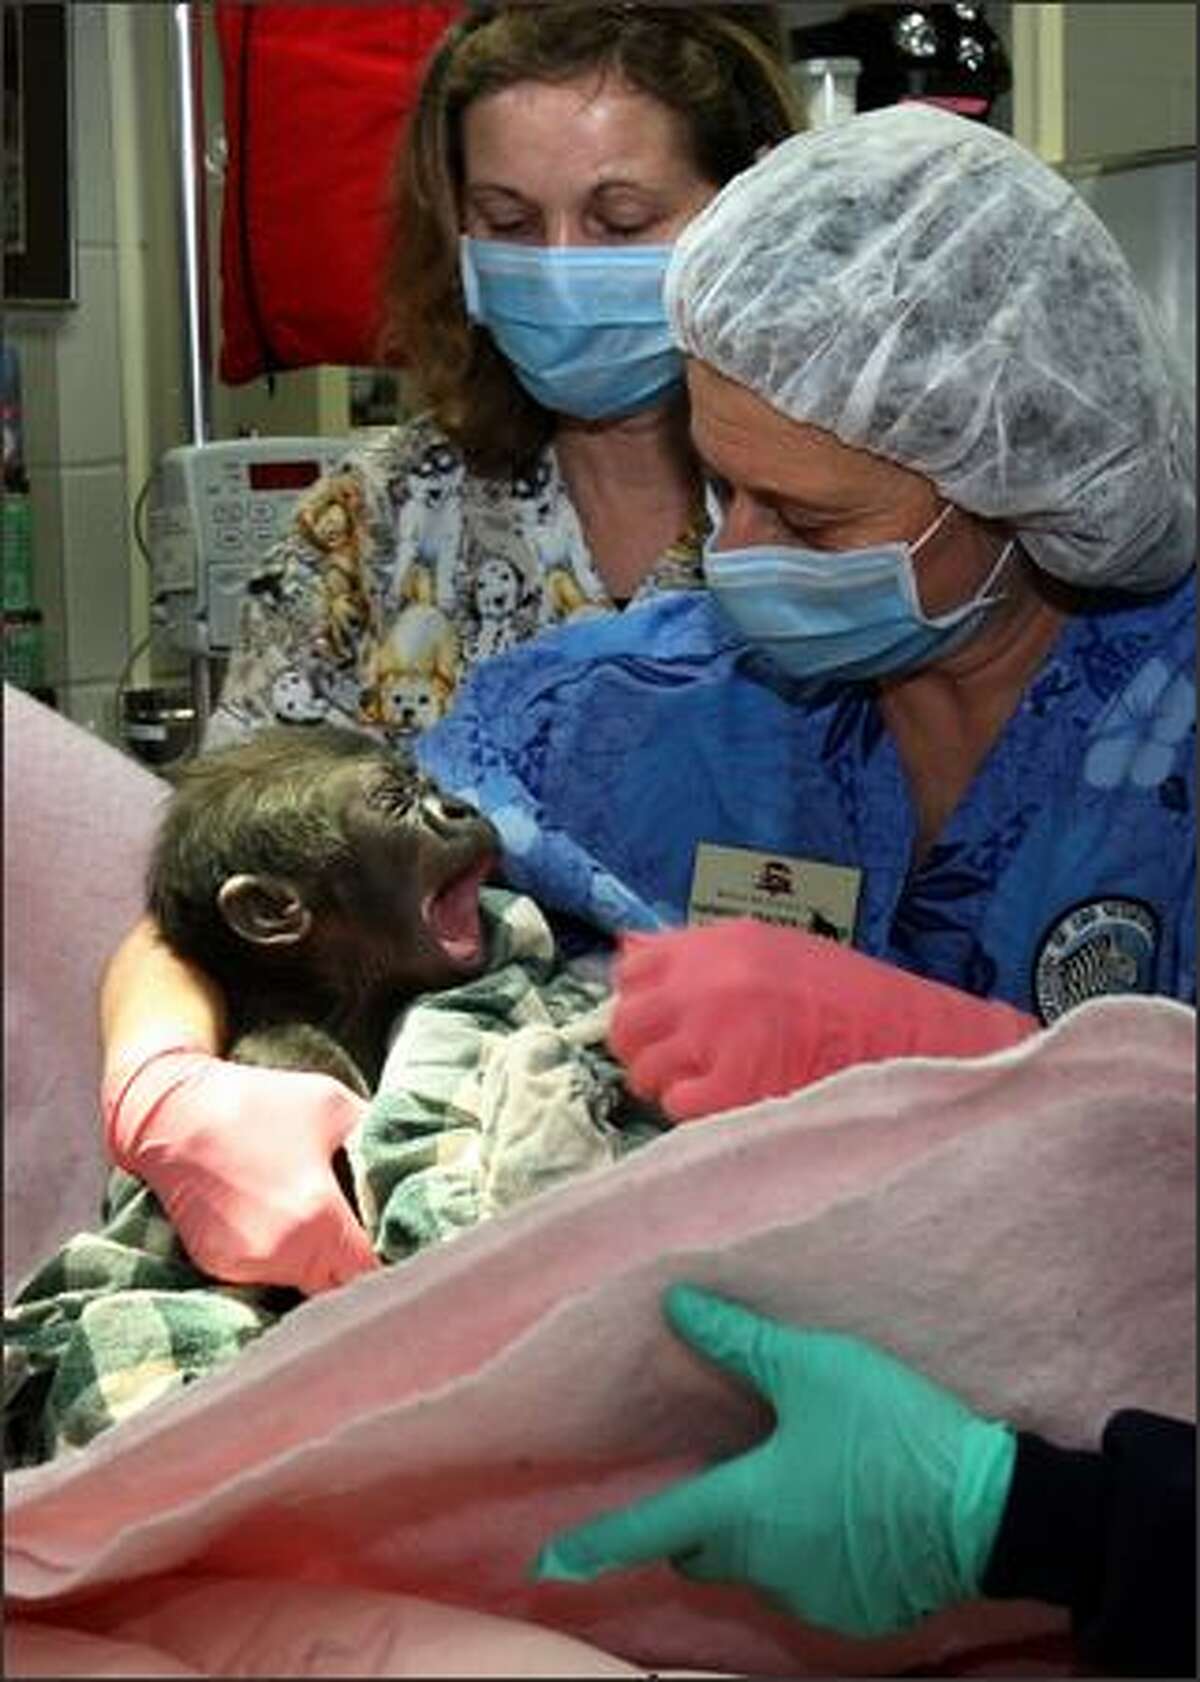 Woodland Park Zoo's baby gorilla wakes after surgery Thursday with a yawn and in the arms of senior veterinary technician Harmony Frazier as vet tech Teri Harmann looks on. The surgery to remove a cyst took an hour.